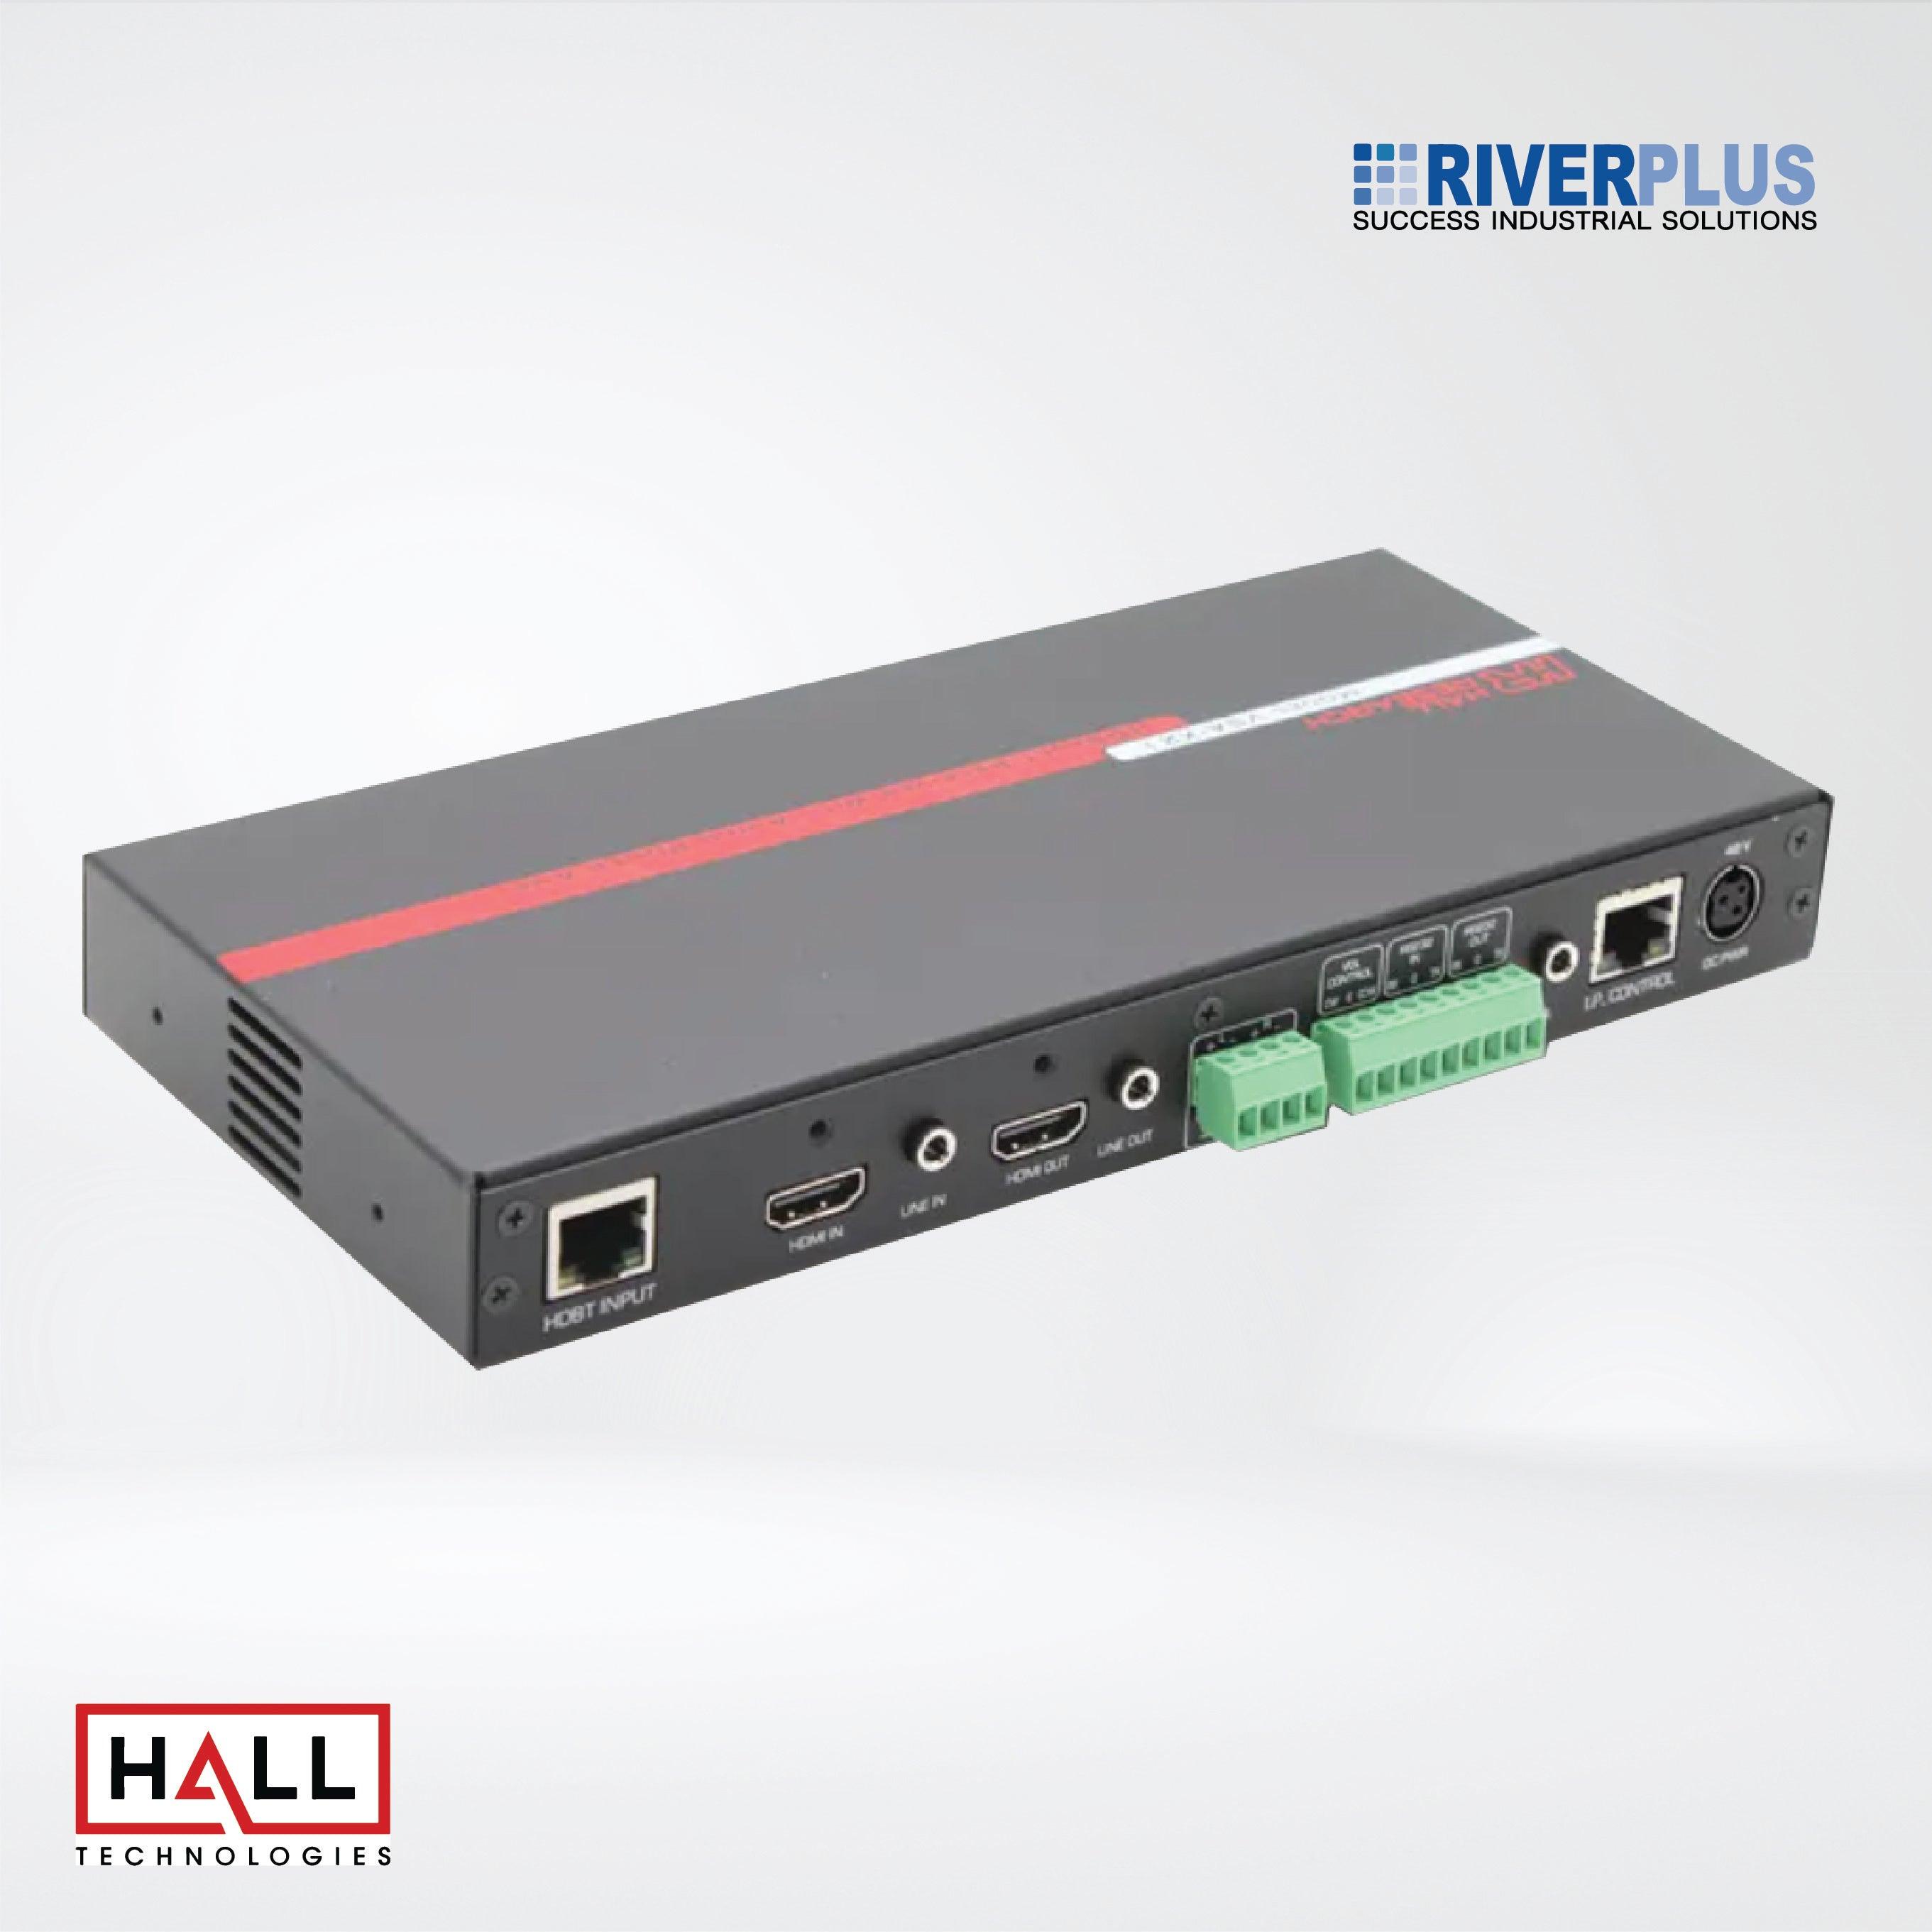 VSA-X21 HDBaseT Receiver with Integrated Switcher, Audio Amp & Controller w/IP - Riverplus